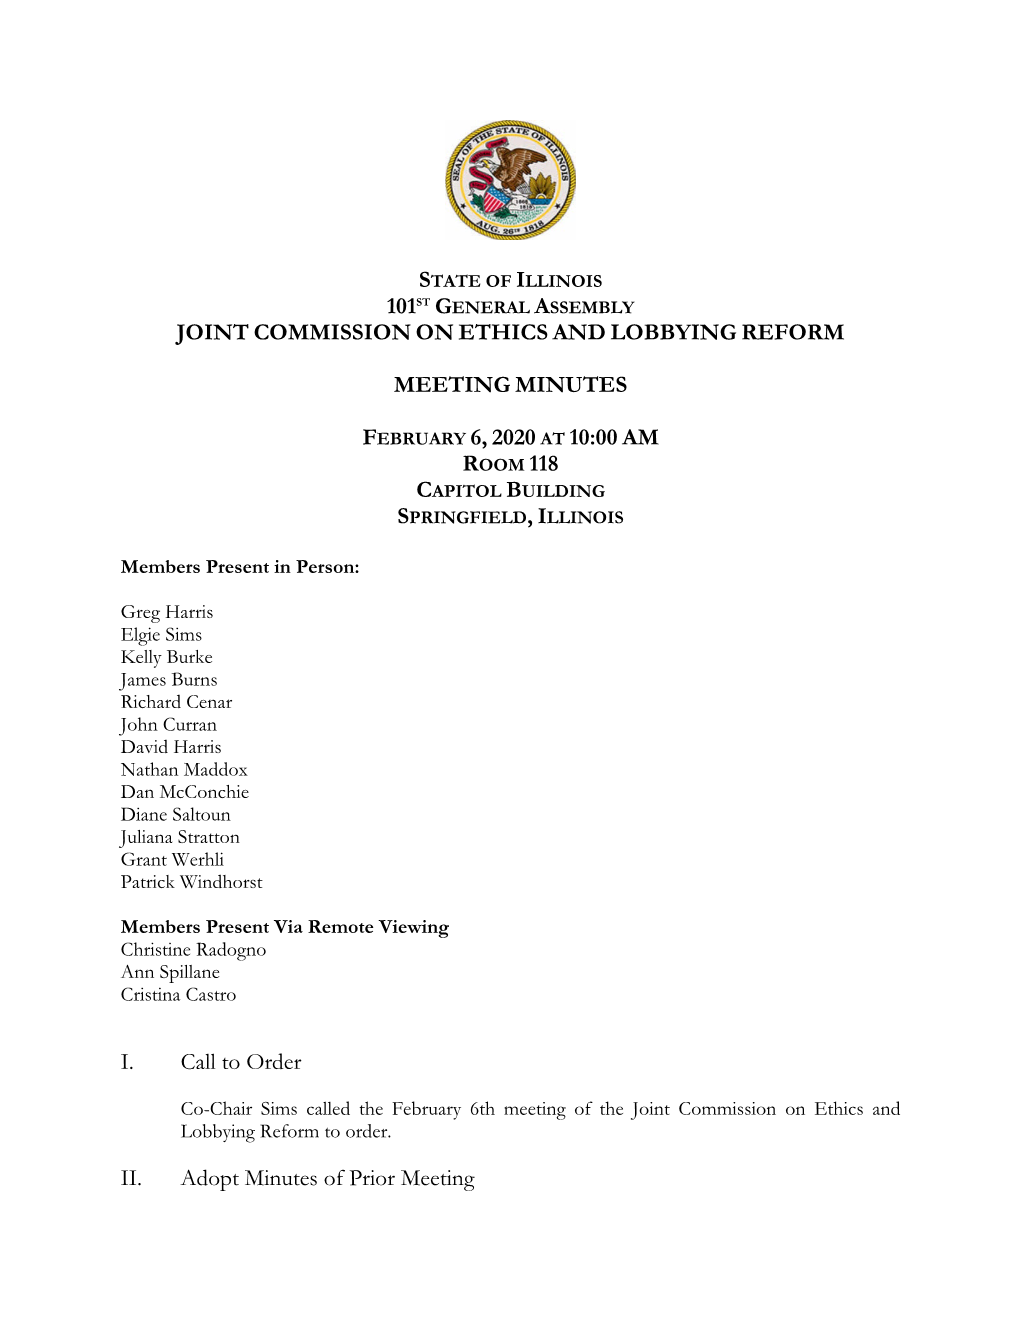 Joint Commission on Ethics and Lobbying Reform